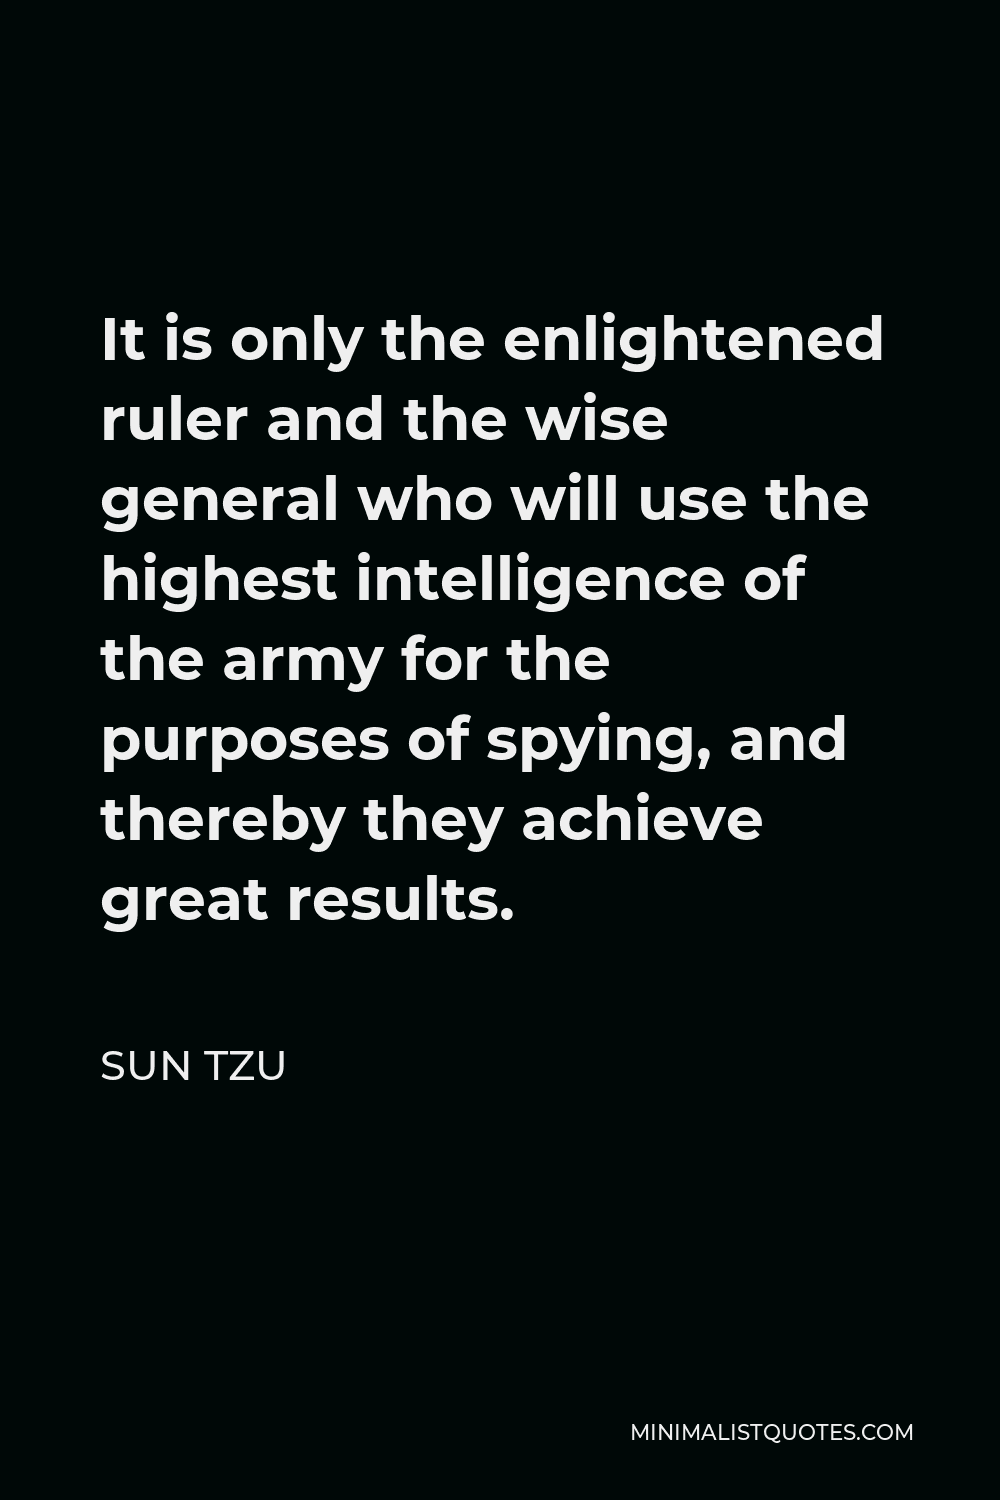 Sun Tzu Quote - It is only the enlightened ruler and the wise general who will use the highest intelligence of the army for the purposes of spying, and thereby they achieve great results.